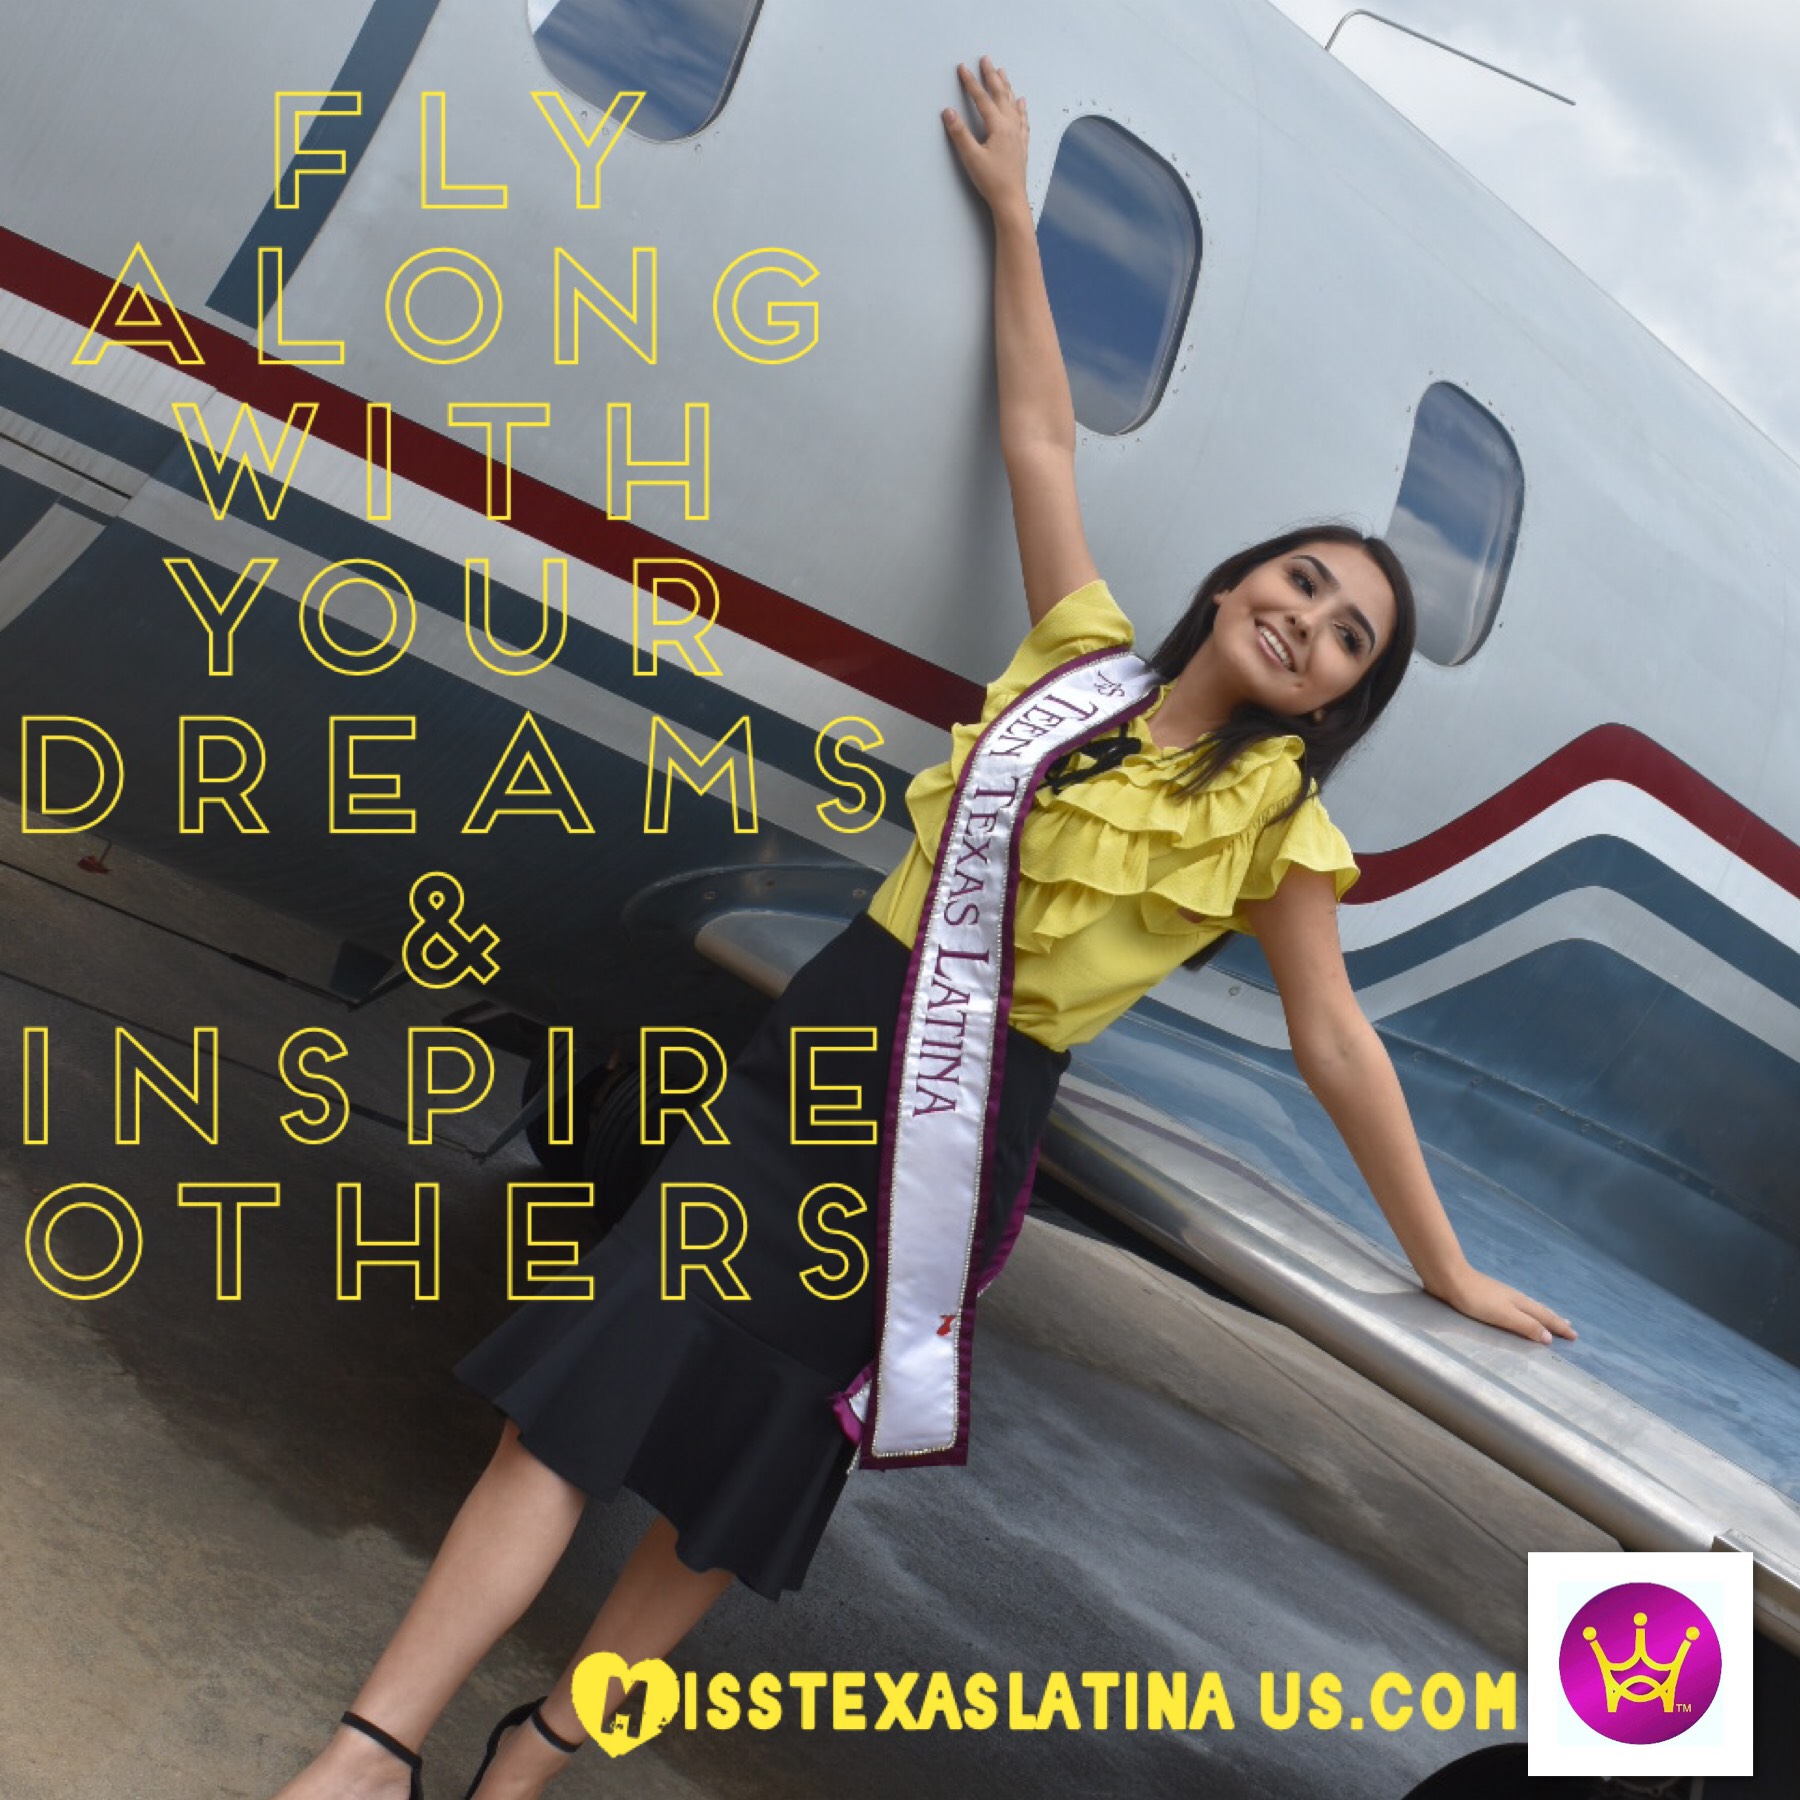 We are just getting the hang of this! 
Instagram: misstexaslatina 
Fly with your dreams and inspire others! 